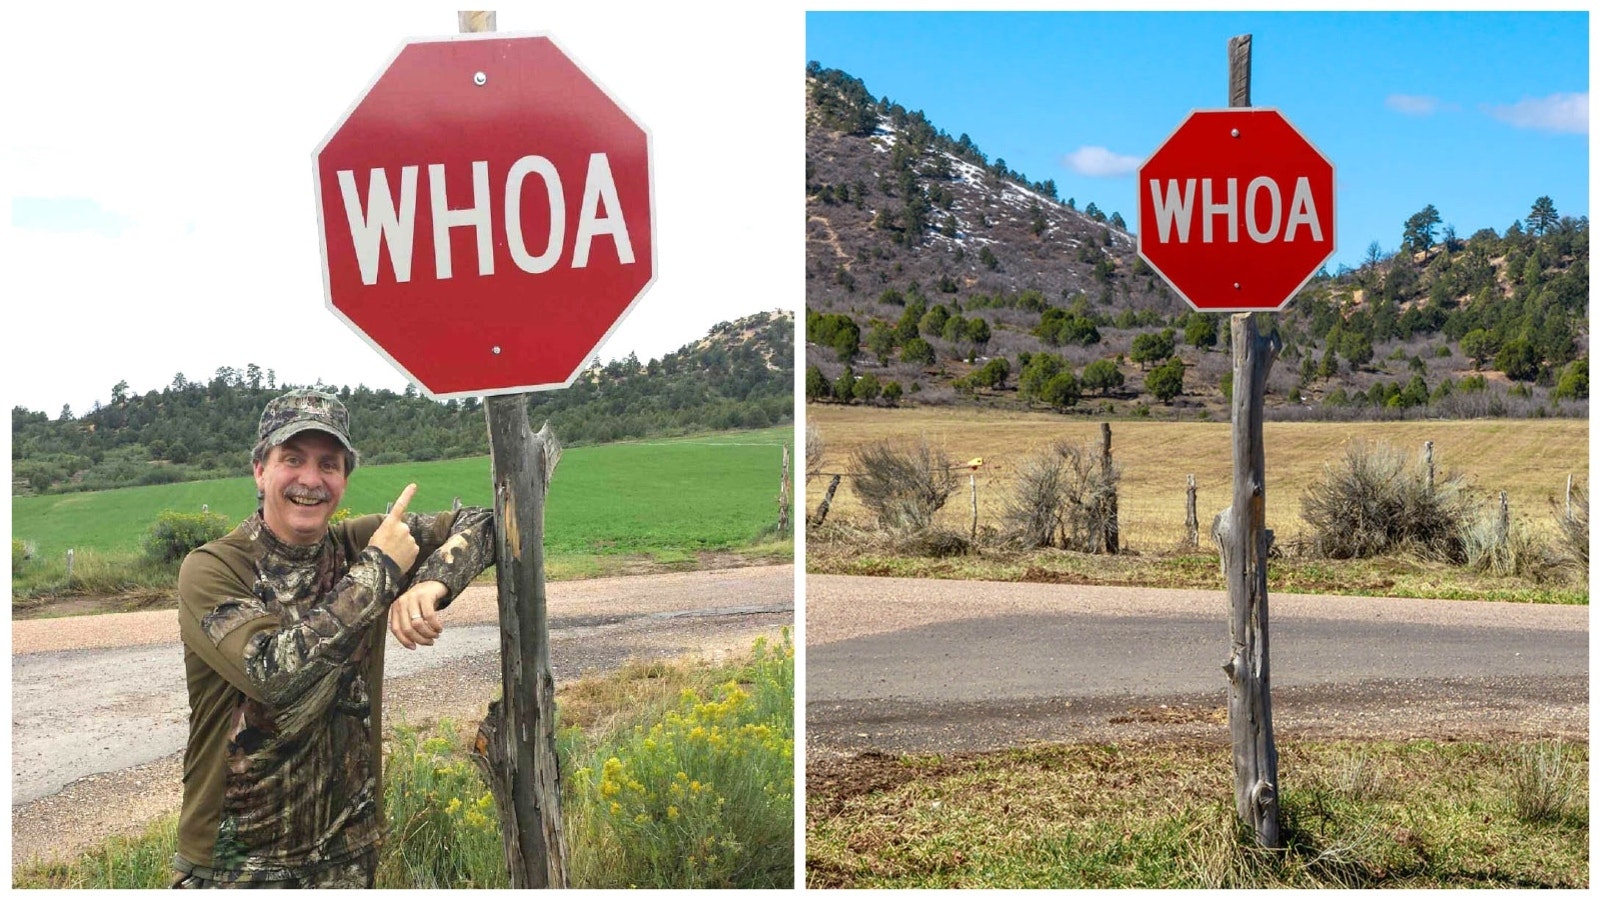 Comedian Jeff Foxworthy poses with one of Alton's "Whoa" signs after discovering them on a hunting trip, according to his Facebook page.